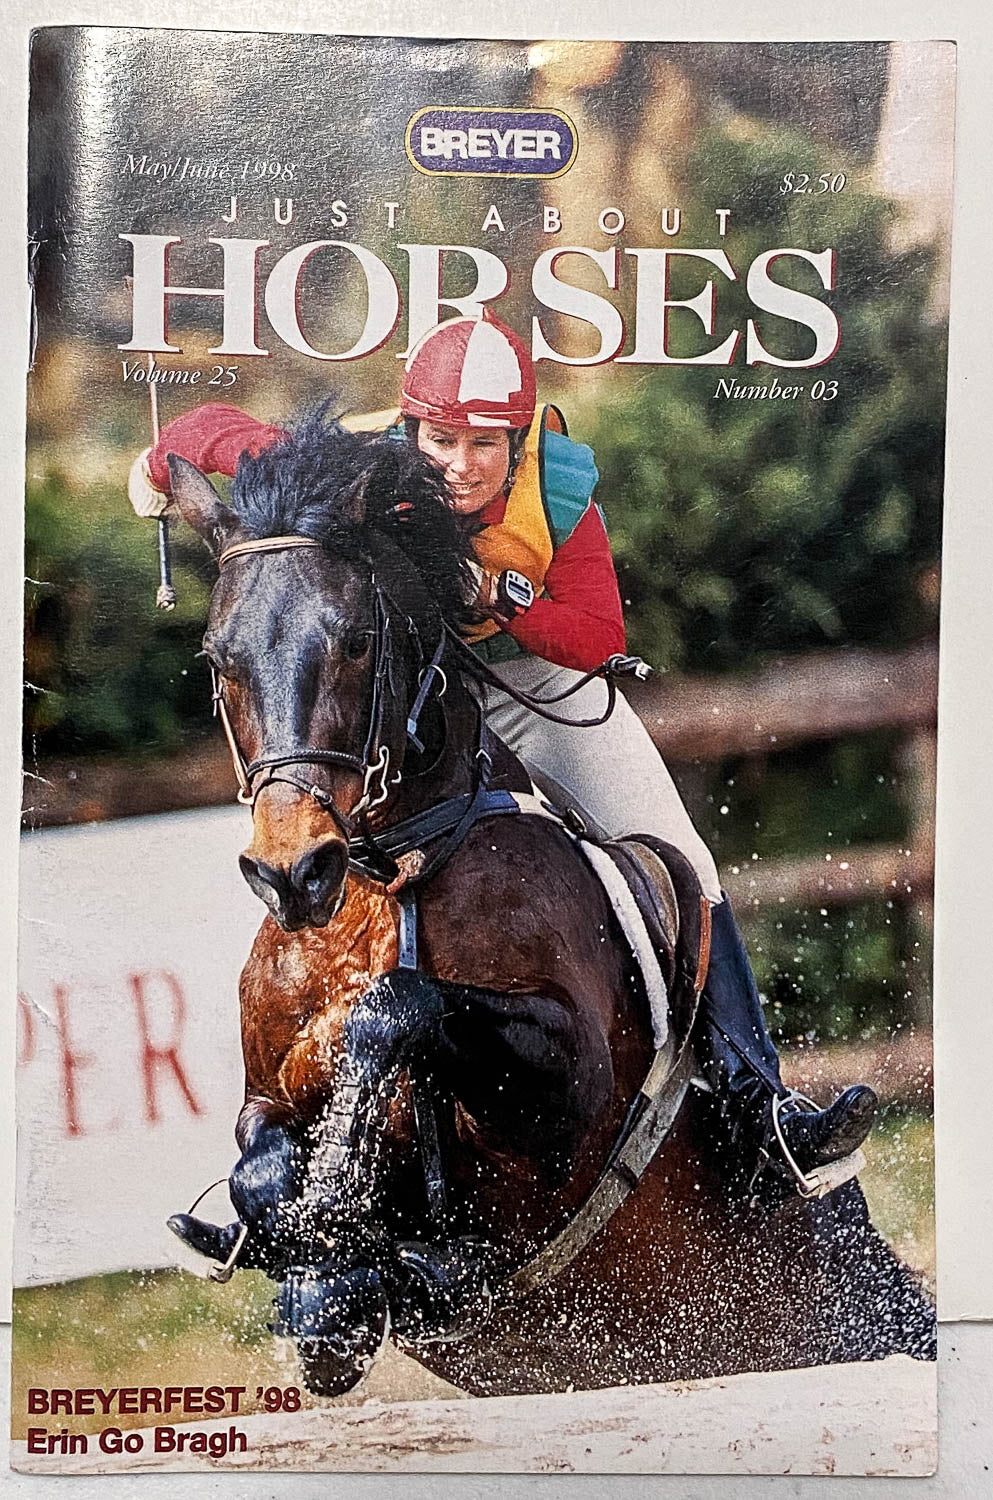 Just About Horses Magazine Vol. 25 No. 3, 1998 May/June